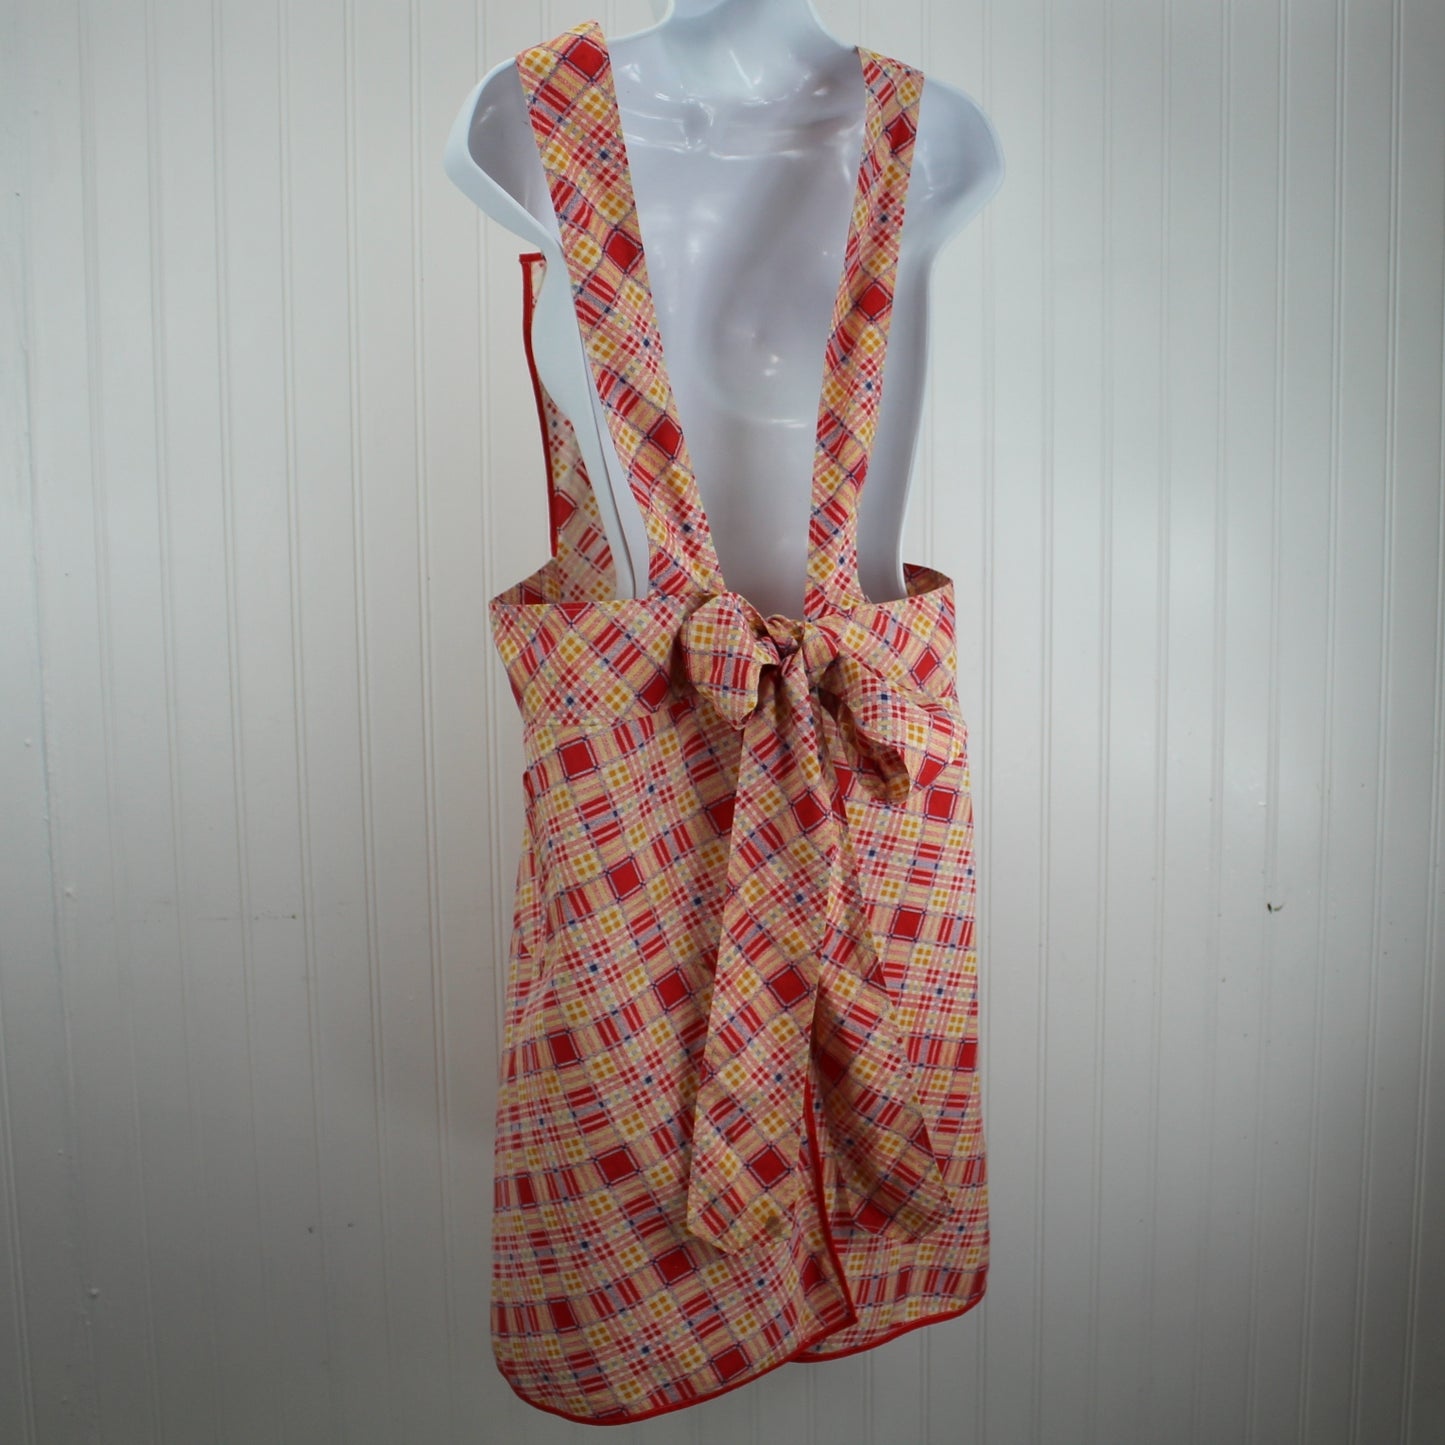 Classic Kitchen Bib Apron 1940s Trimmed Bias Binding Wide Shoulder Straps made for work and comfort while working